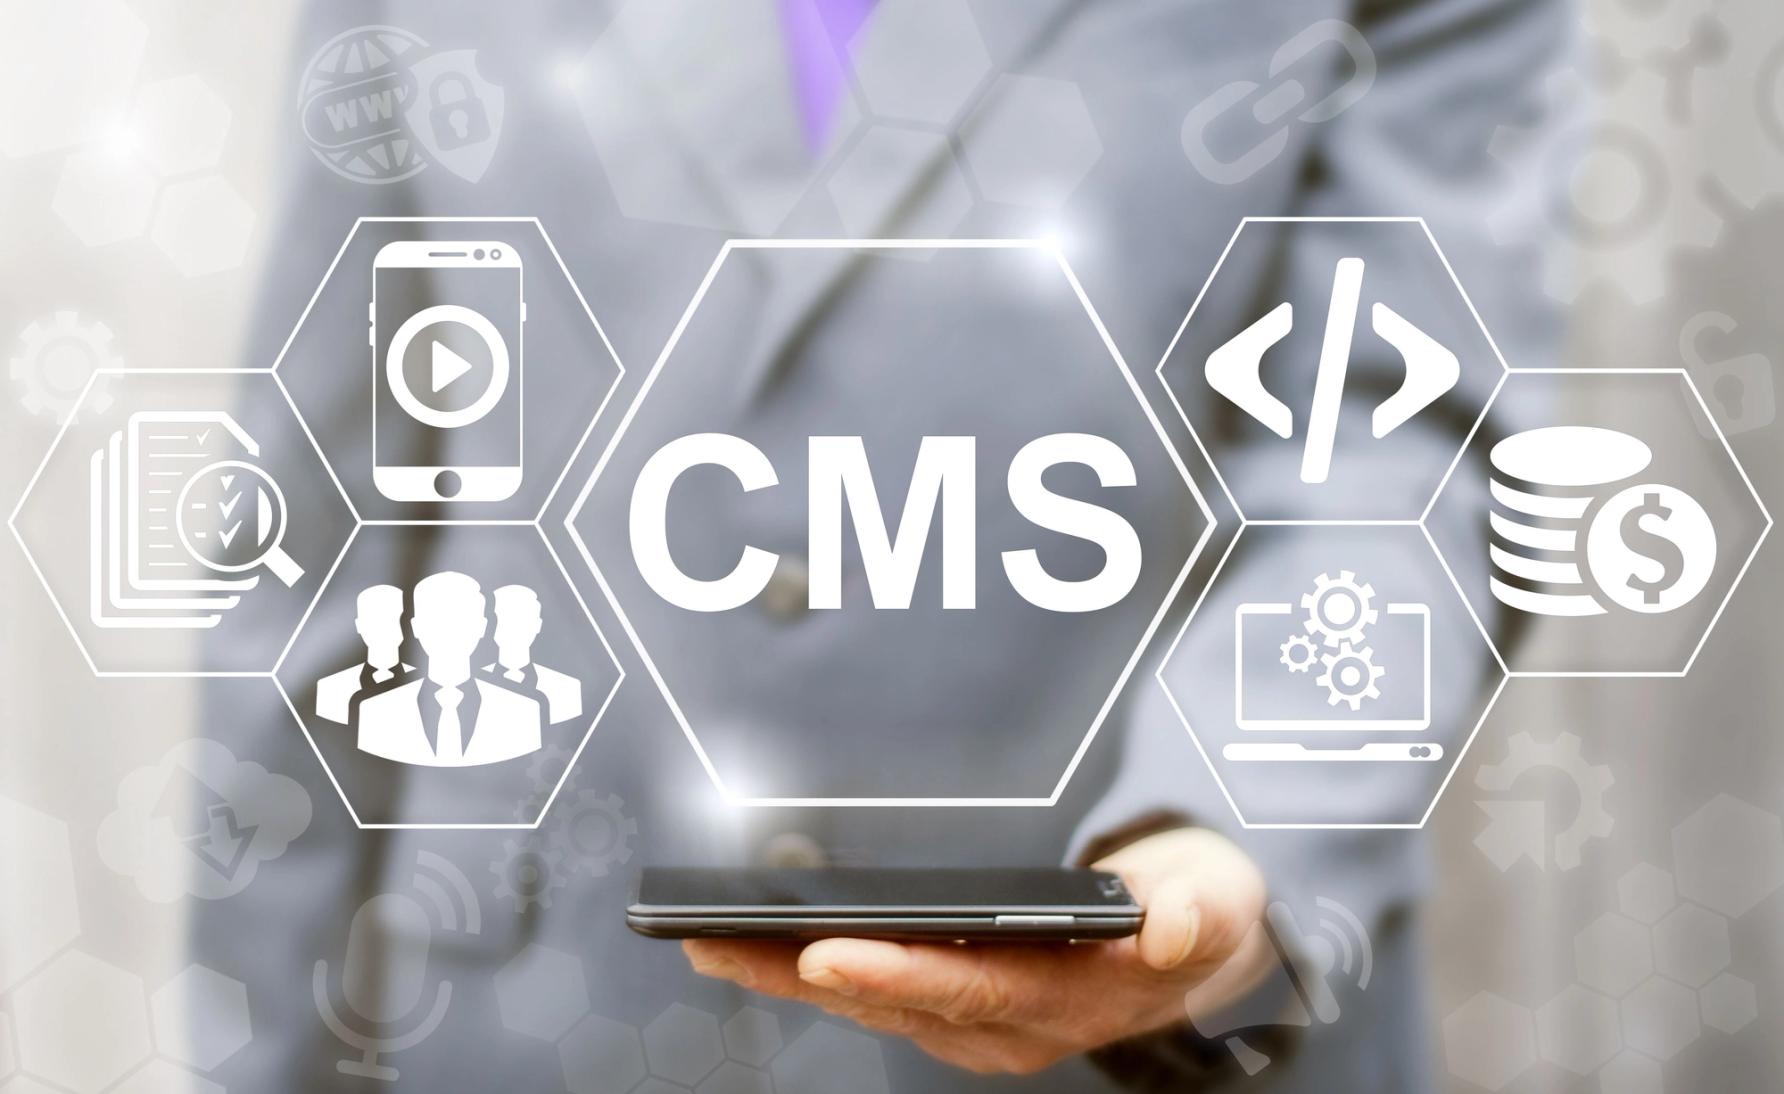 graphic showing different icons floating around a CMS icon